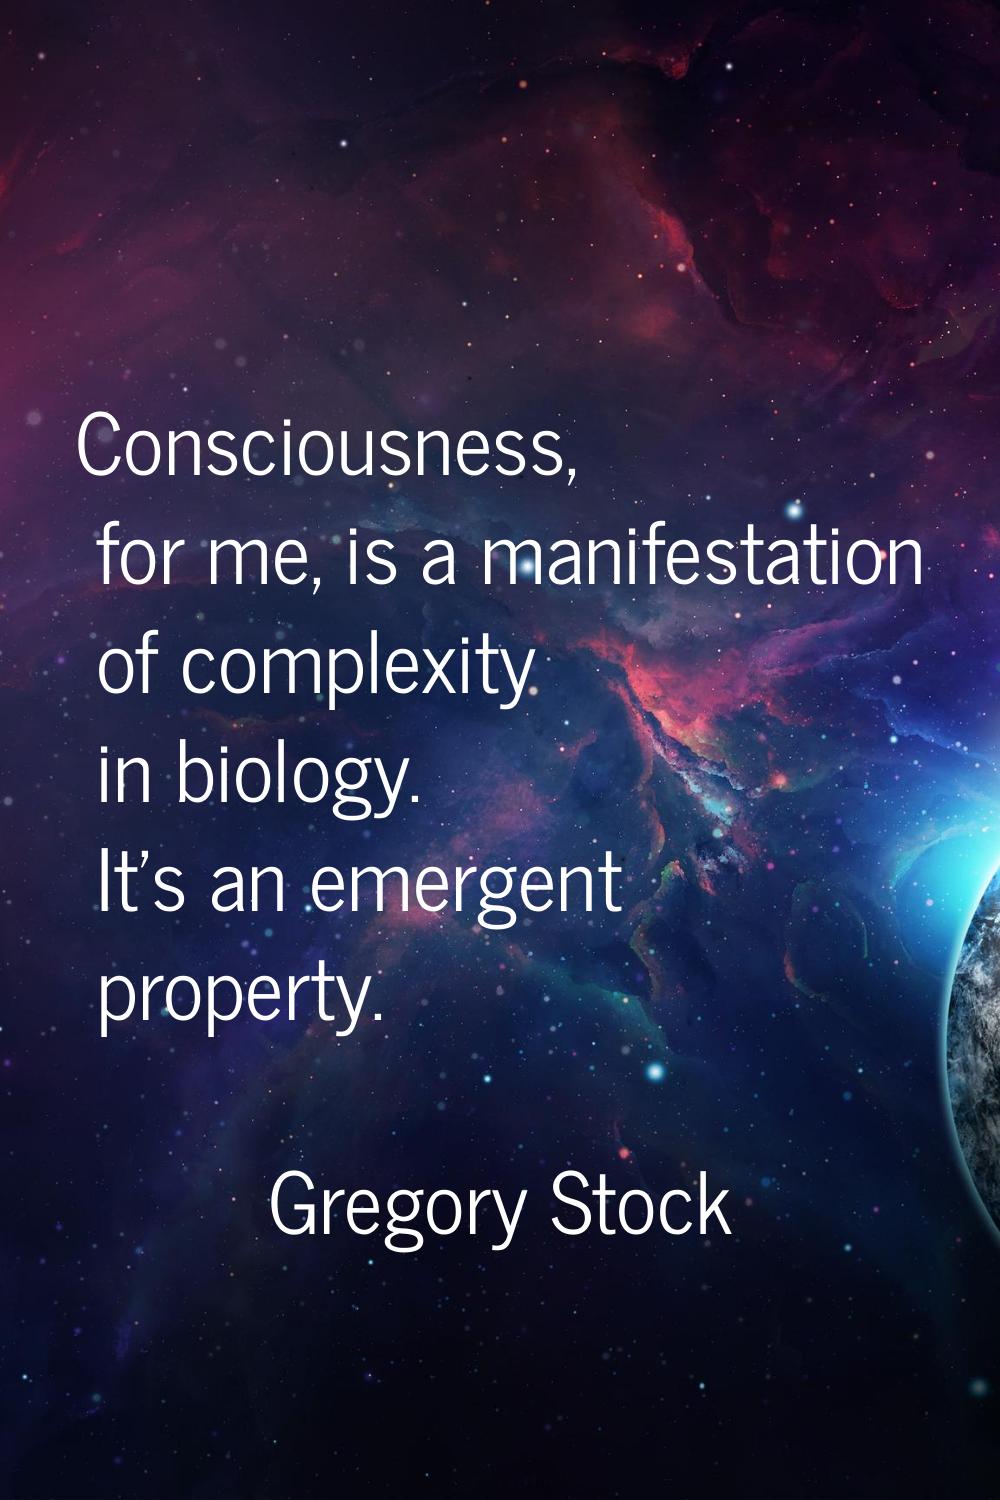 Consciousness, for me, is a manifestation of complexity in biology. It's an emergent property.